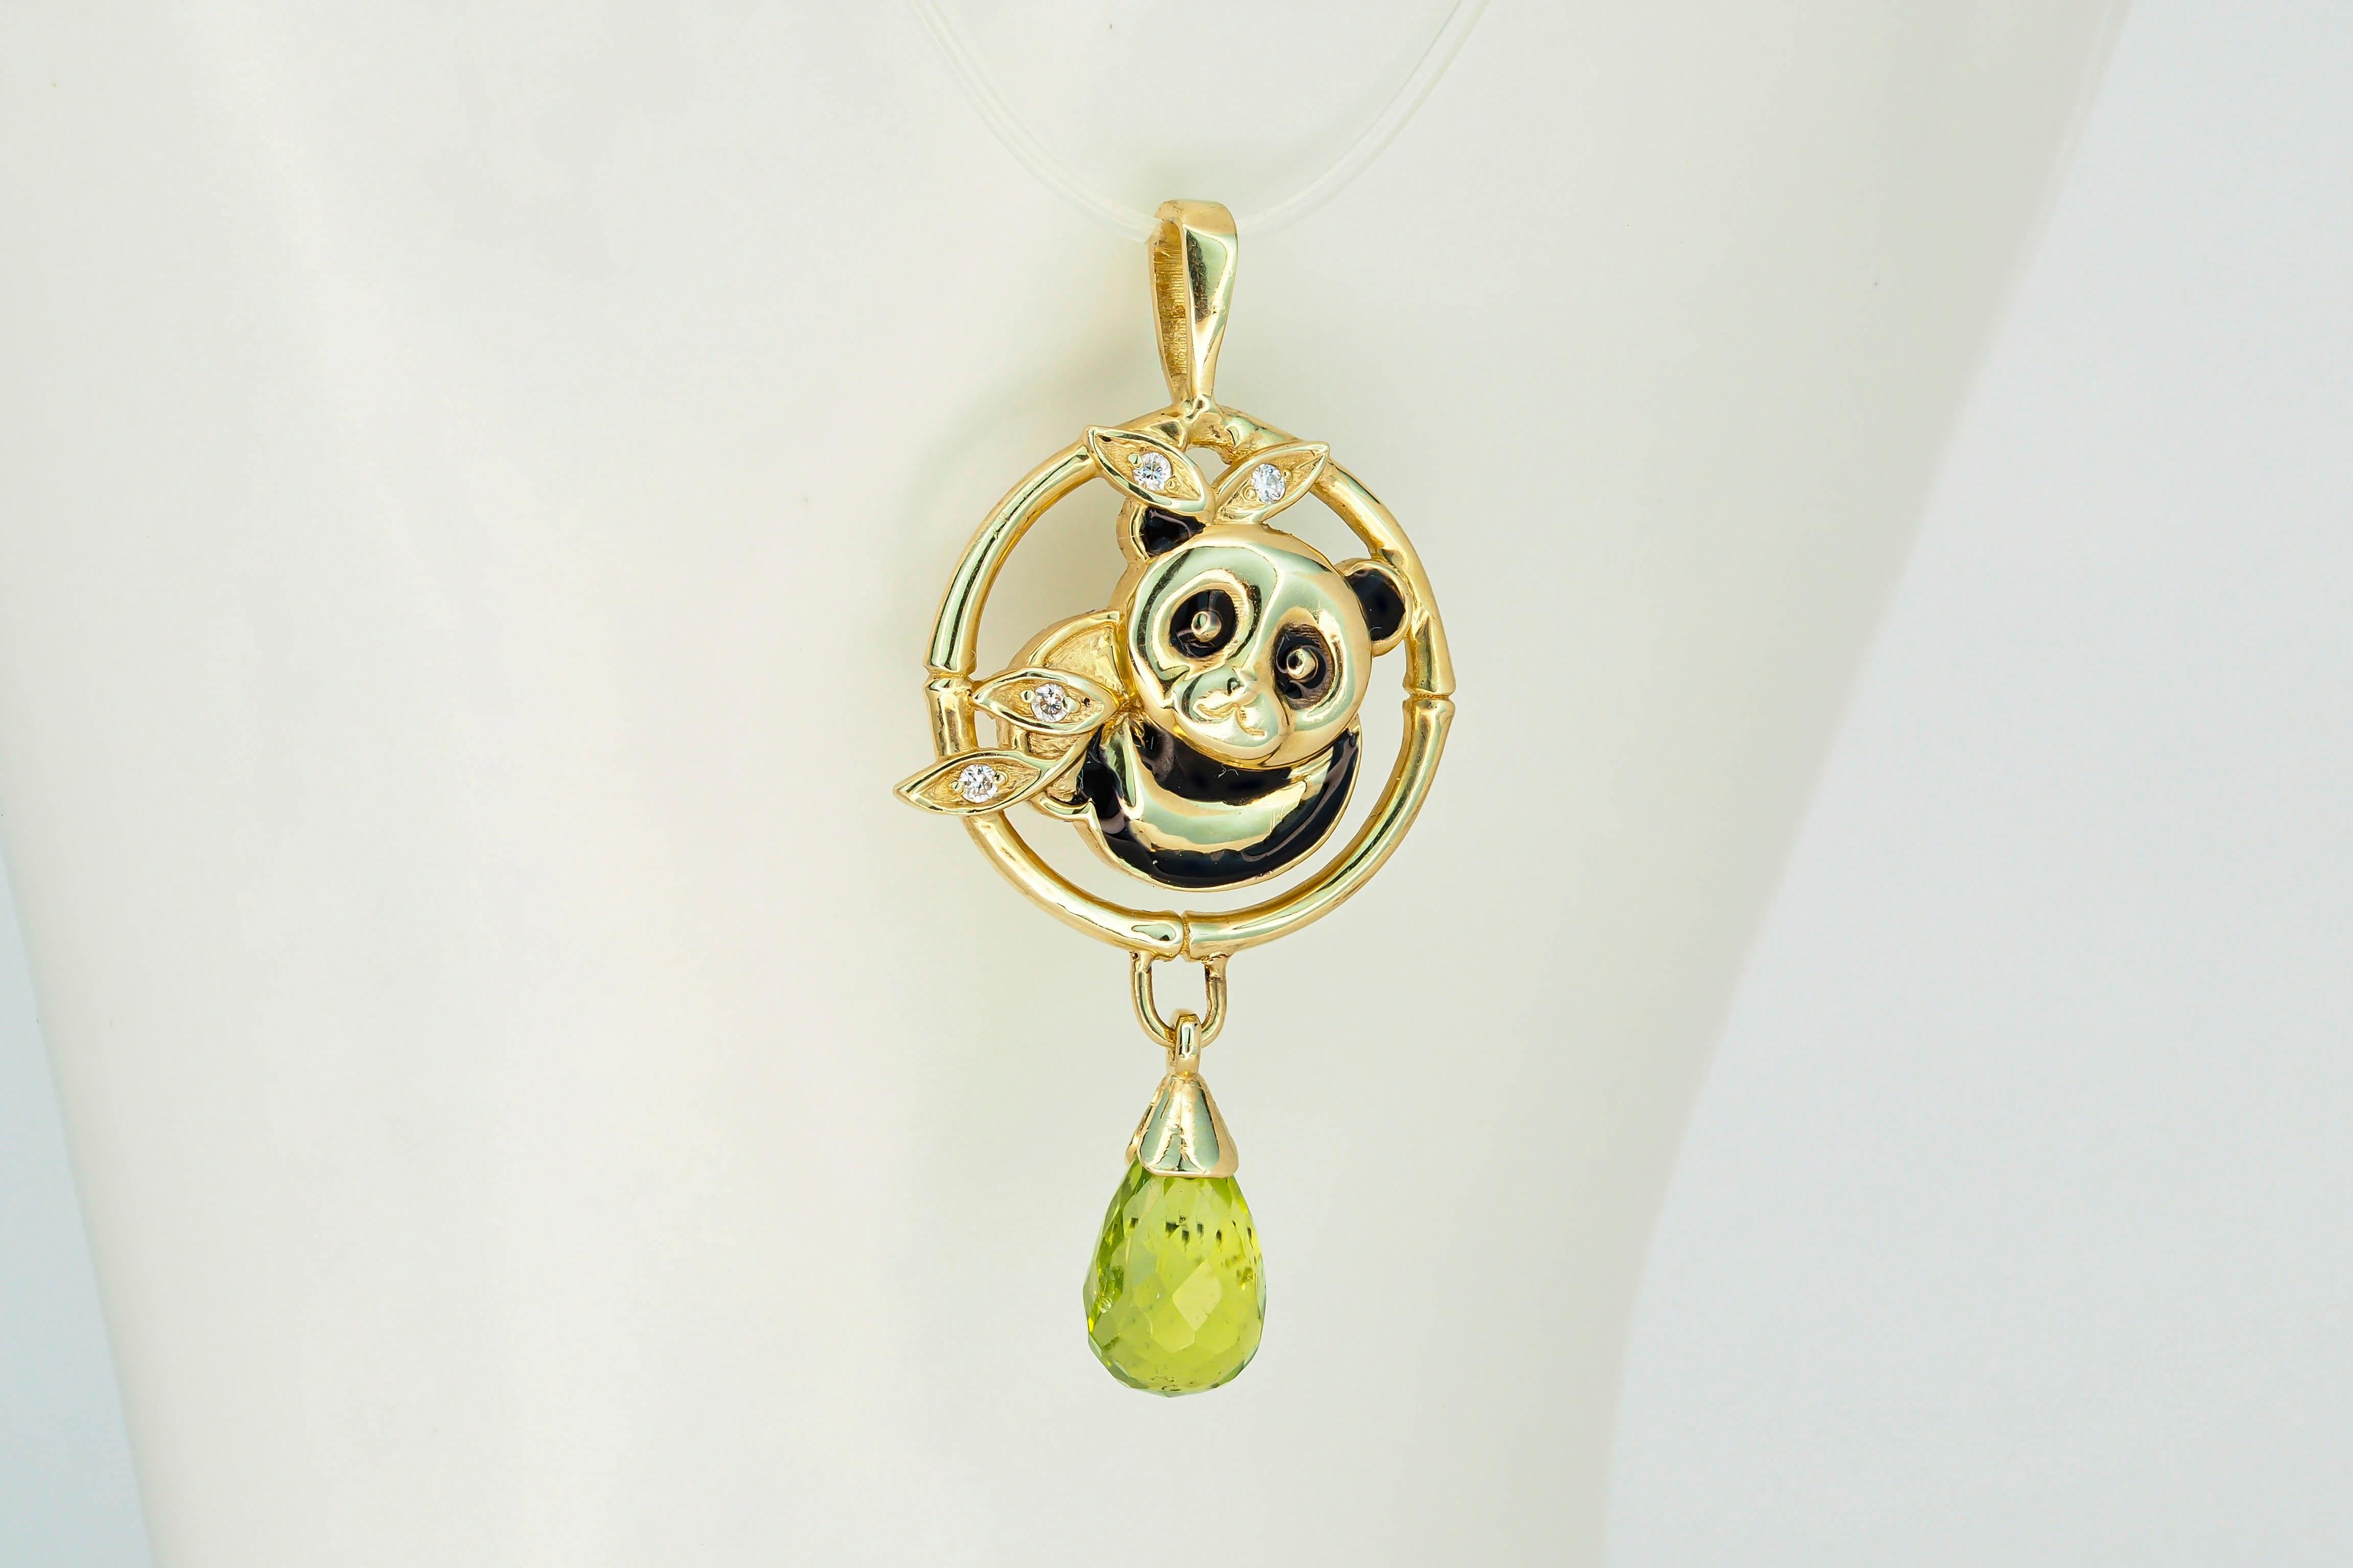 14 kt solid gold Koala Bear pendant with natural peridot and diamonds. August birthstone.
Metal: 14kt solid gold
Pendant size: 32.35 x 15.5 mm.
Weight: 1.8 g.

Gemstones:
Natural peridot: 1 piece, weight -  approx 1.20 ct.
Briolette cut, apple green